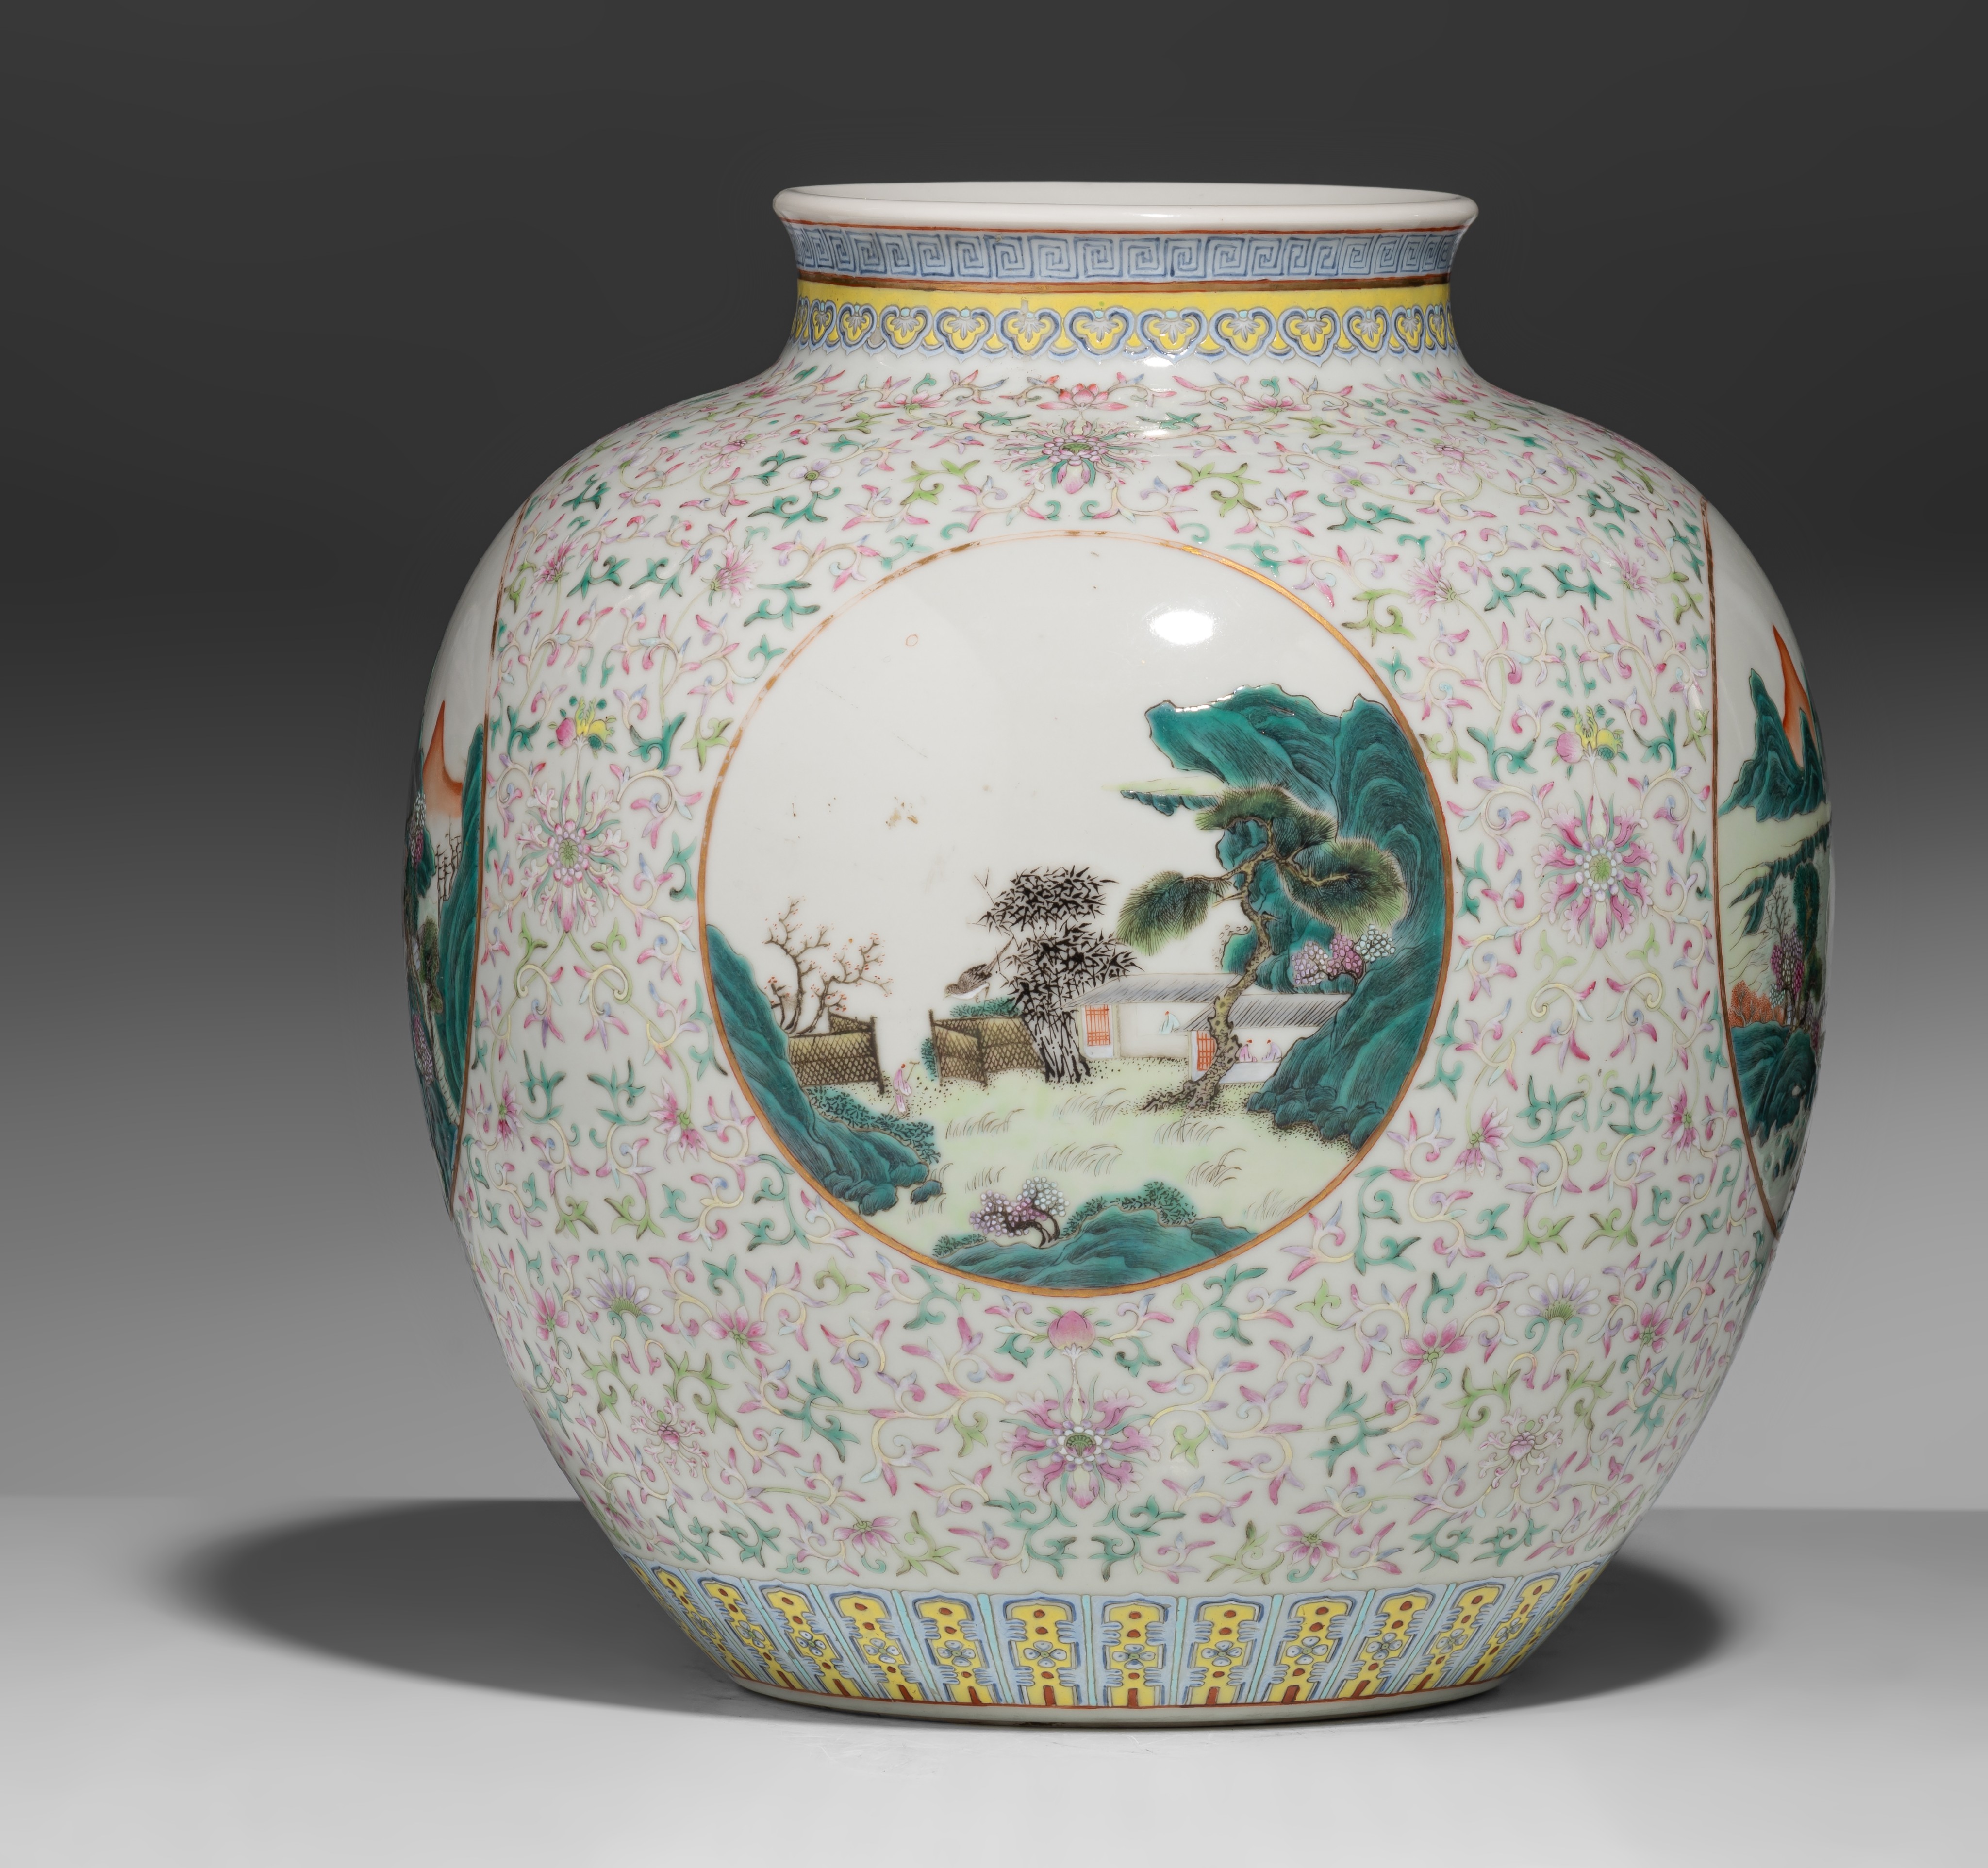 A Chinese famille rose 'Lotus scroll' zun vase, with a Qianlong mark, 19thC, H 25 - ø 23 cm - Image 3 of 8